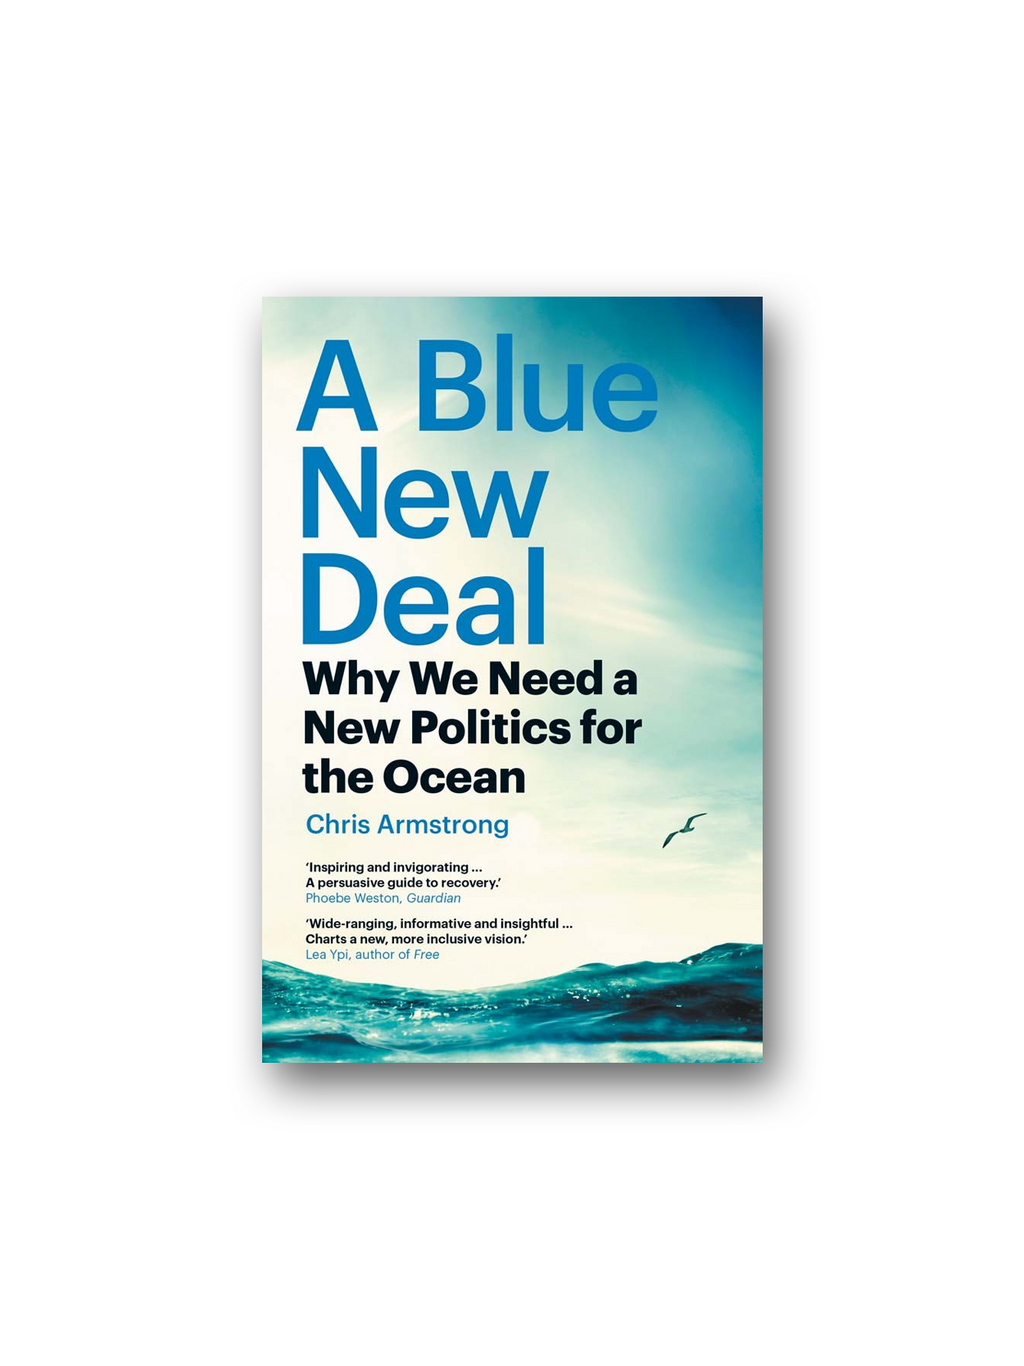 Blue New Deal: Why We Need a New Politics for the Ocean